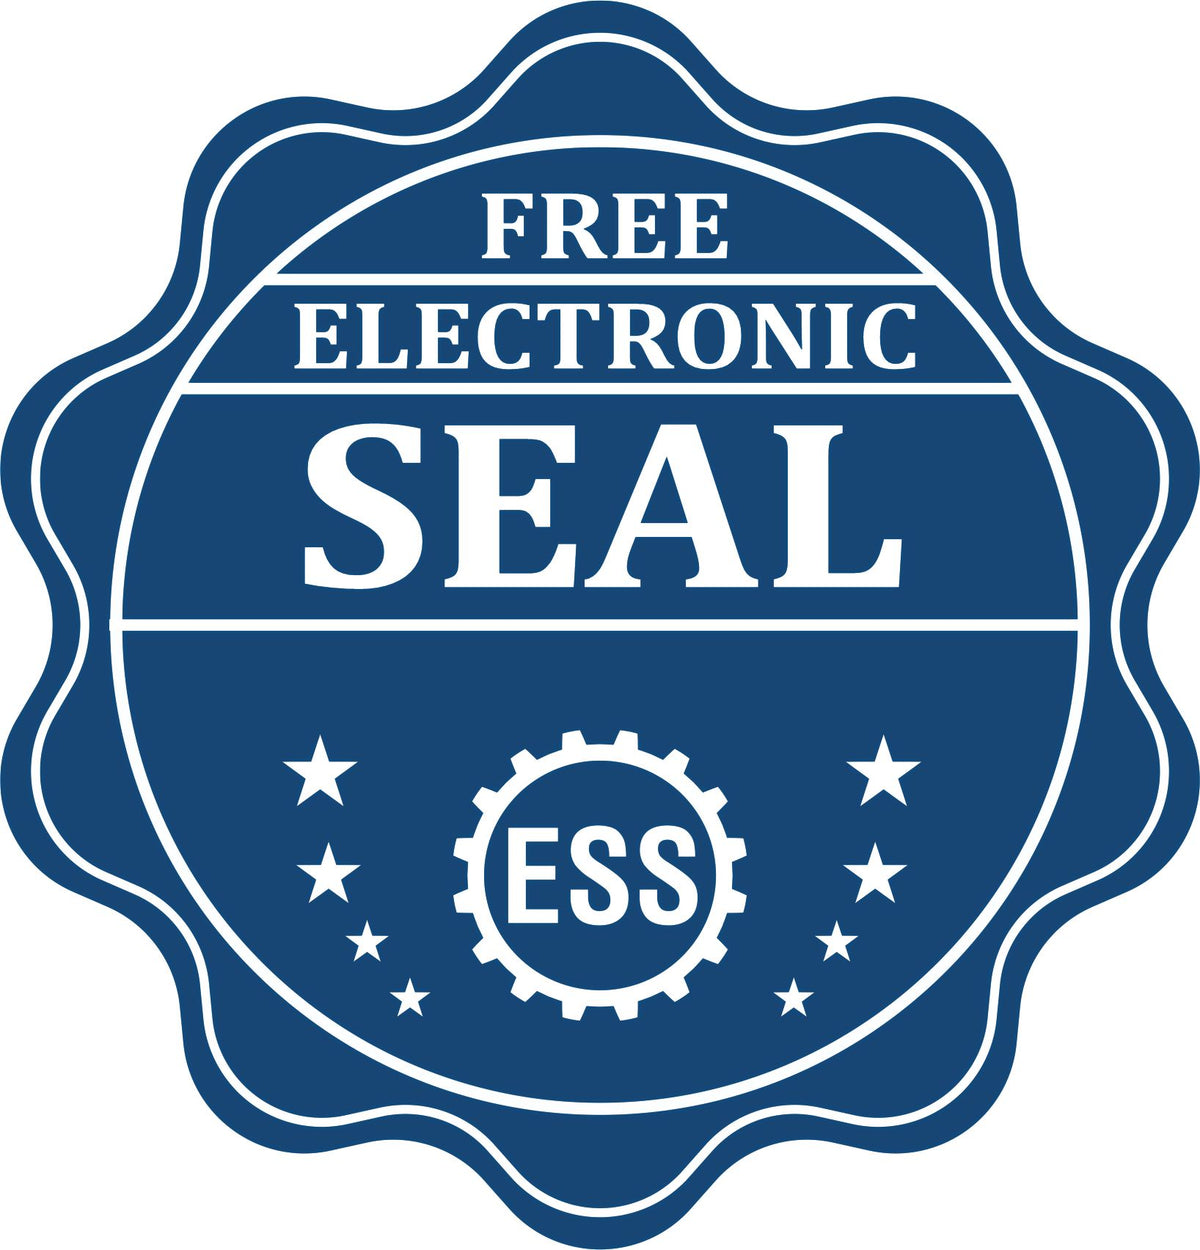 A badge showing a free electronic seal for the Gift Colorado Land Surveyor Seal with stars and the ESS gear on the emblem.